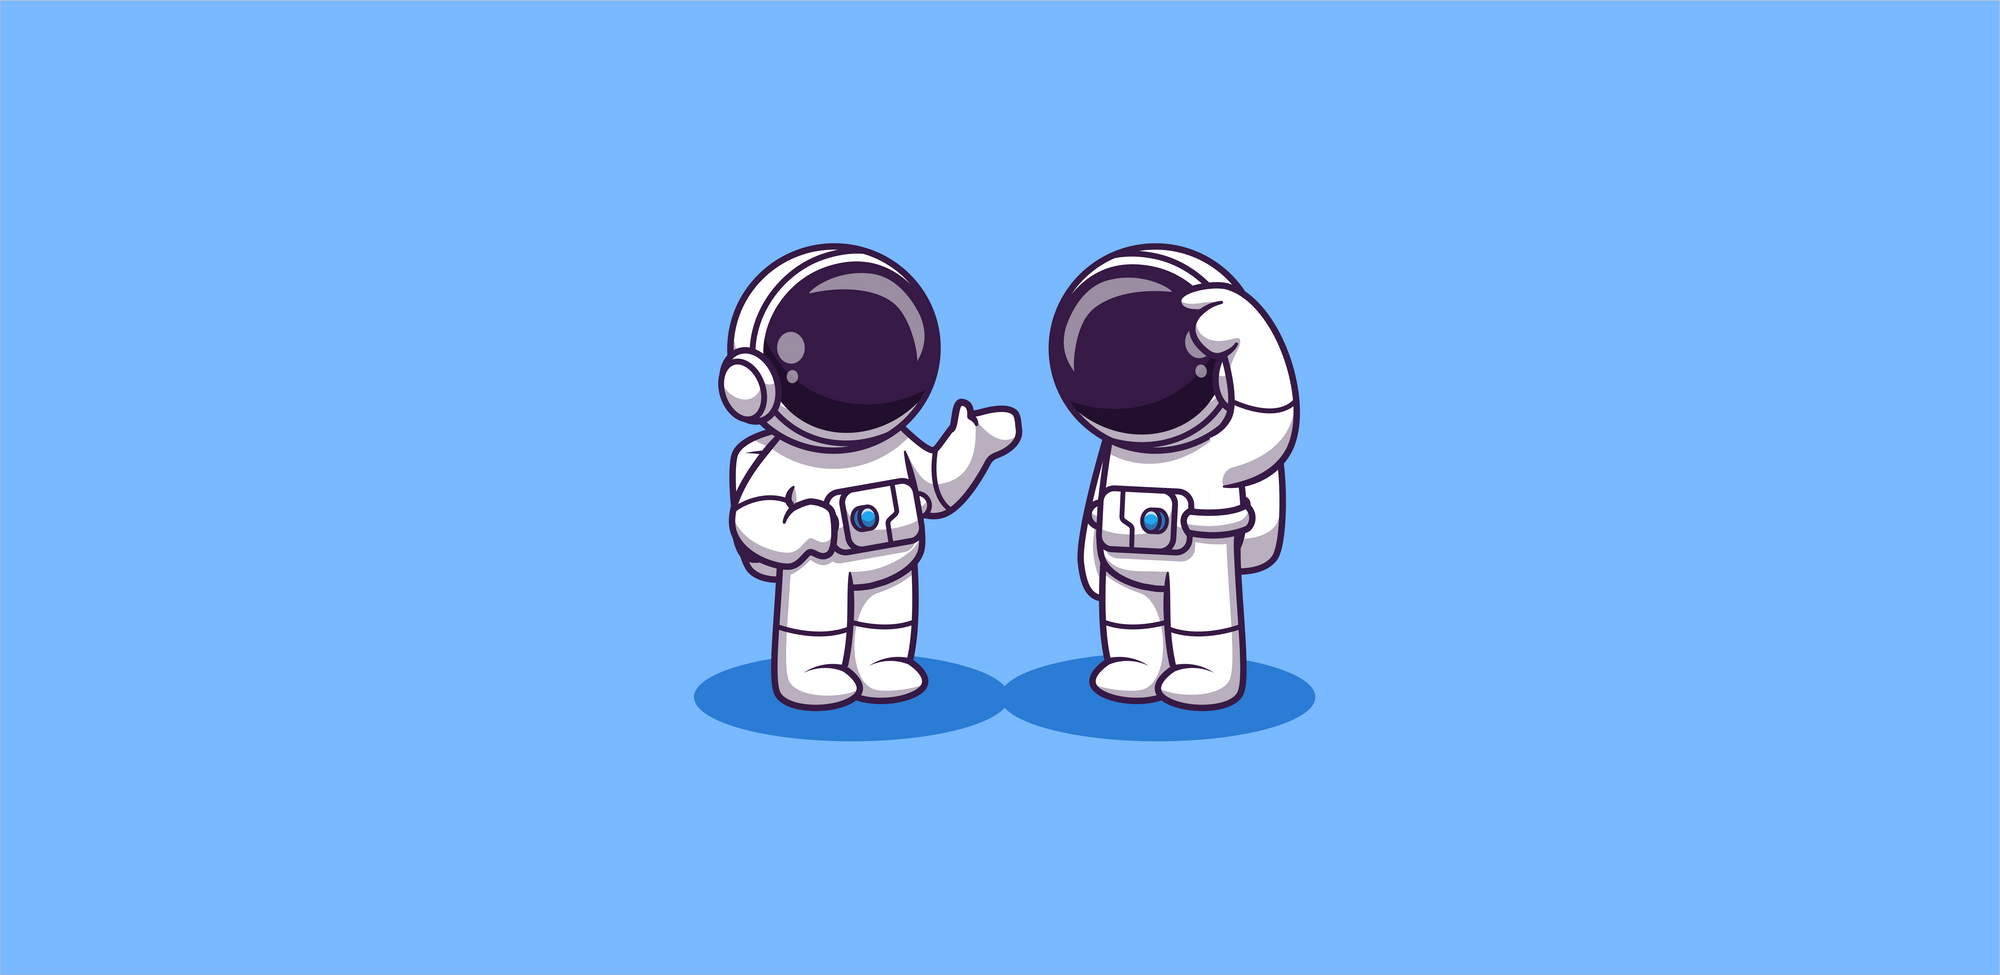 Illustration of two astronauts engaged in conversation.